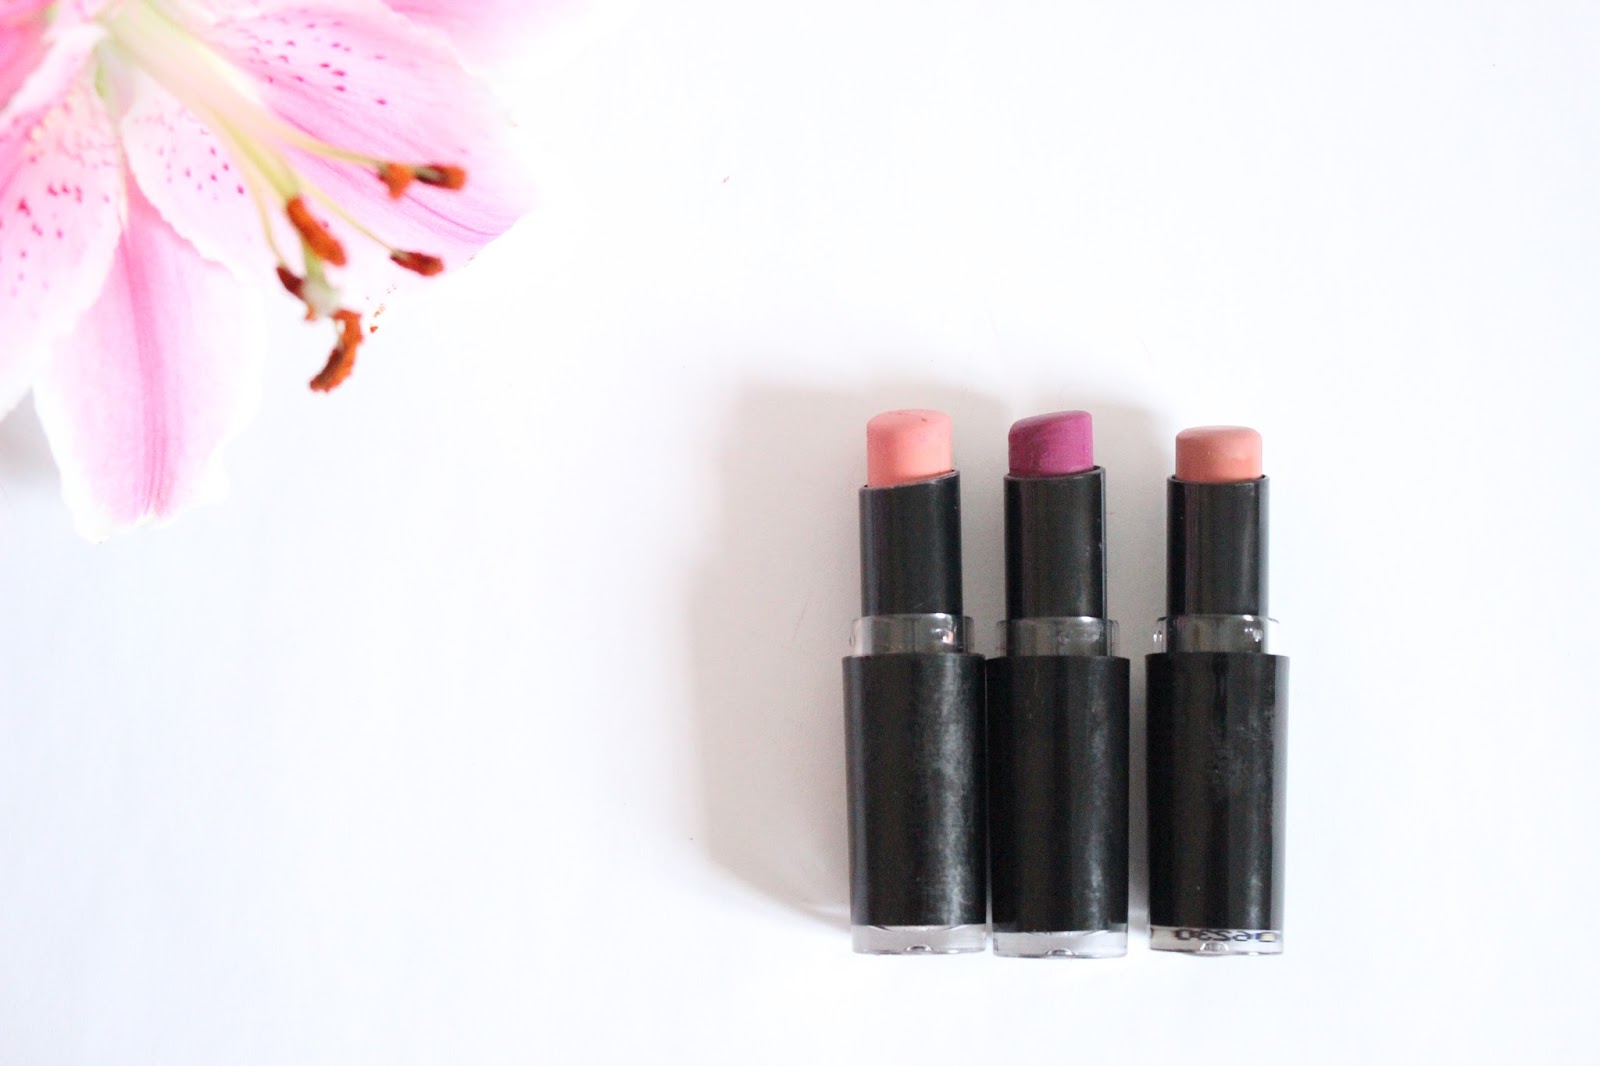 The $2 Most Duped Lipsticks | Wet n Wild Megalast Lipsticks in (L-R) Just Peachy, Sugar Plum Fairy and Bare It All.